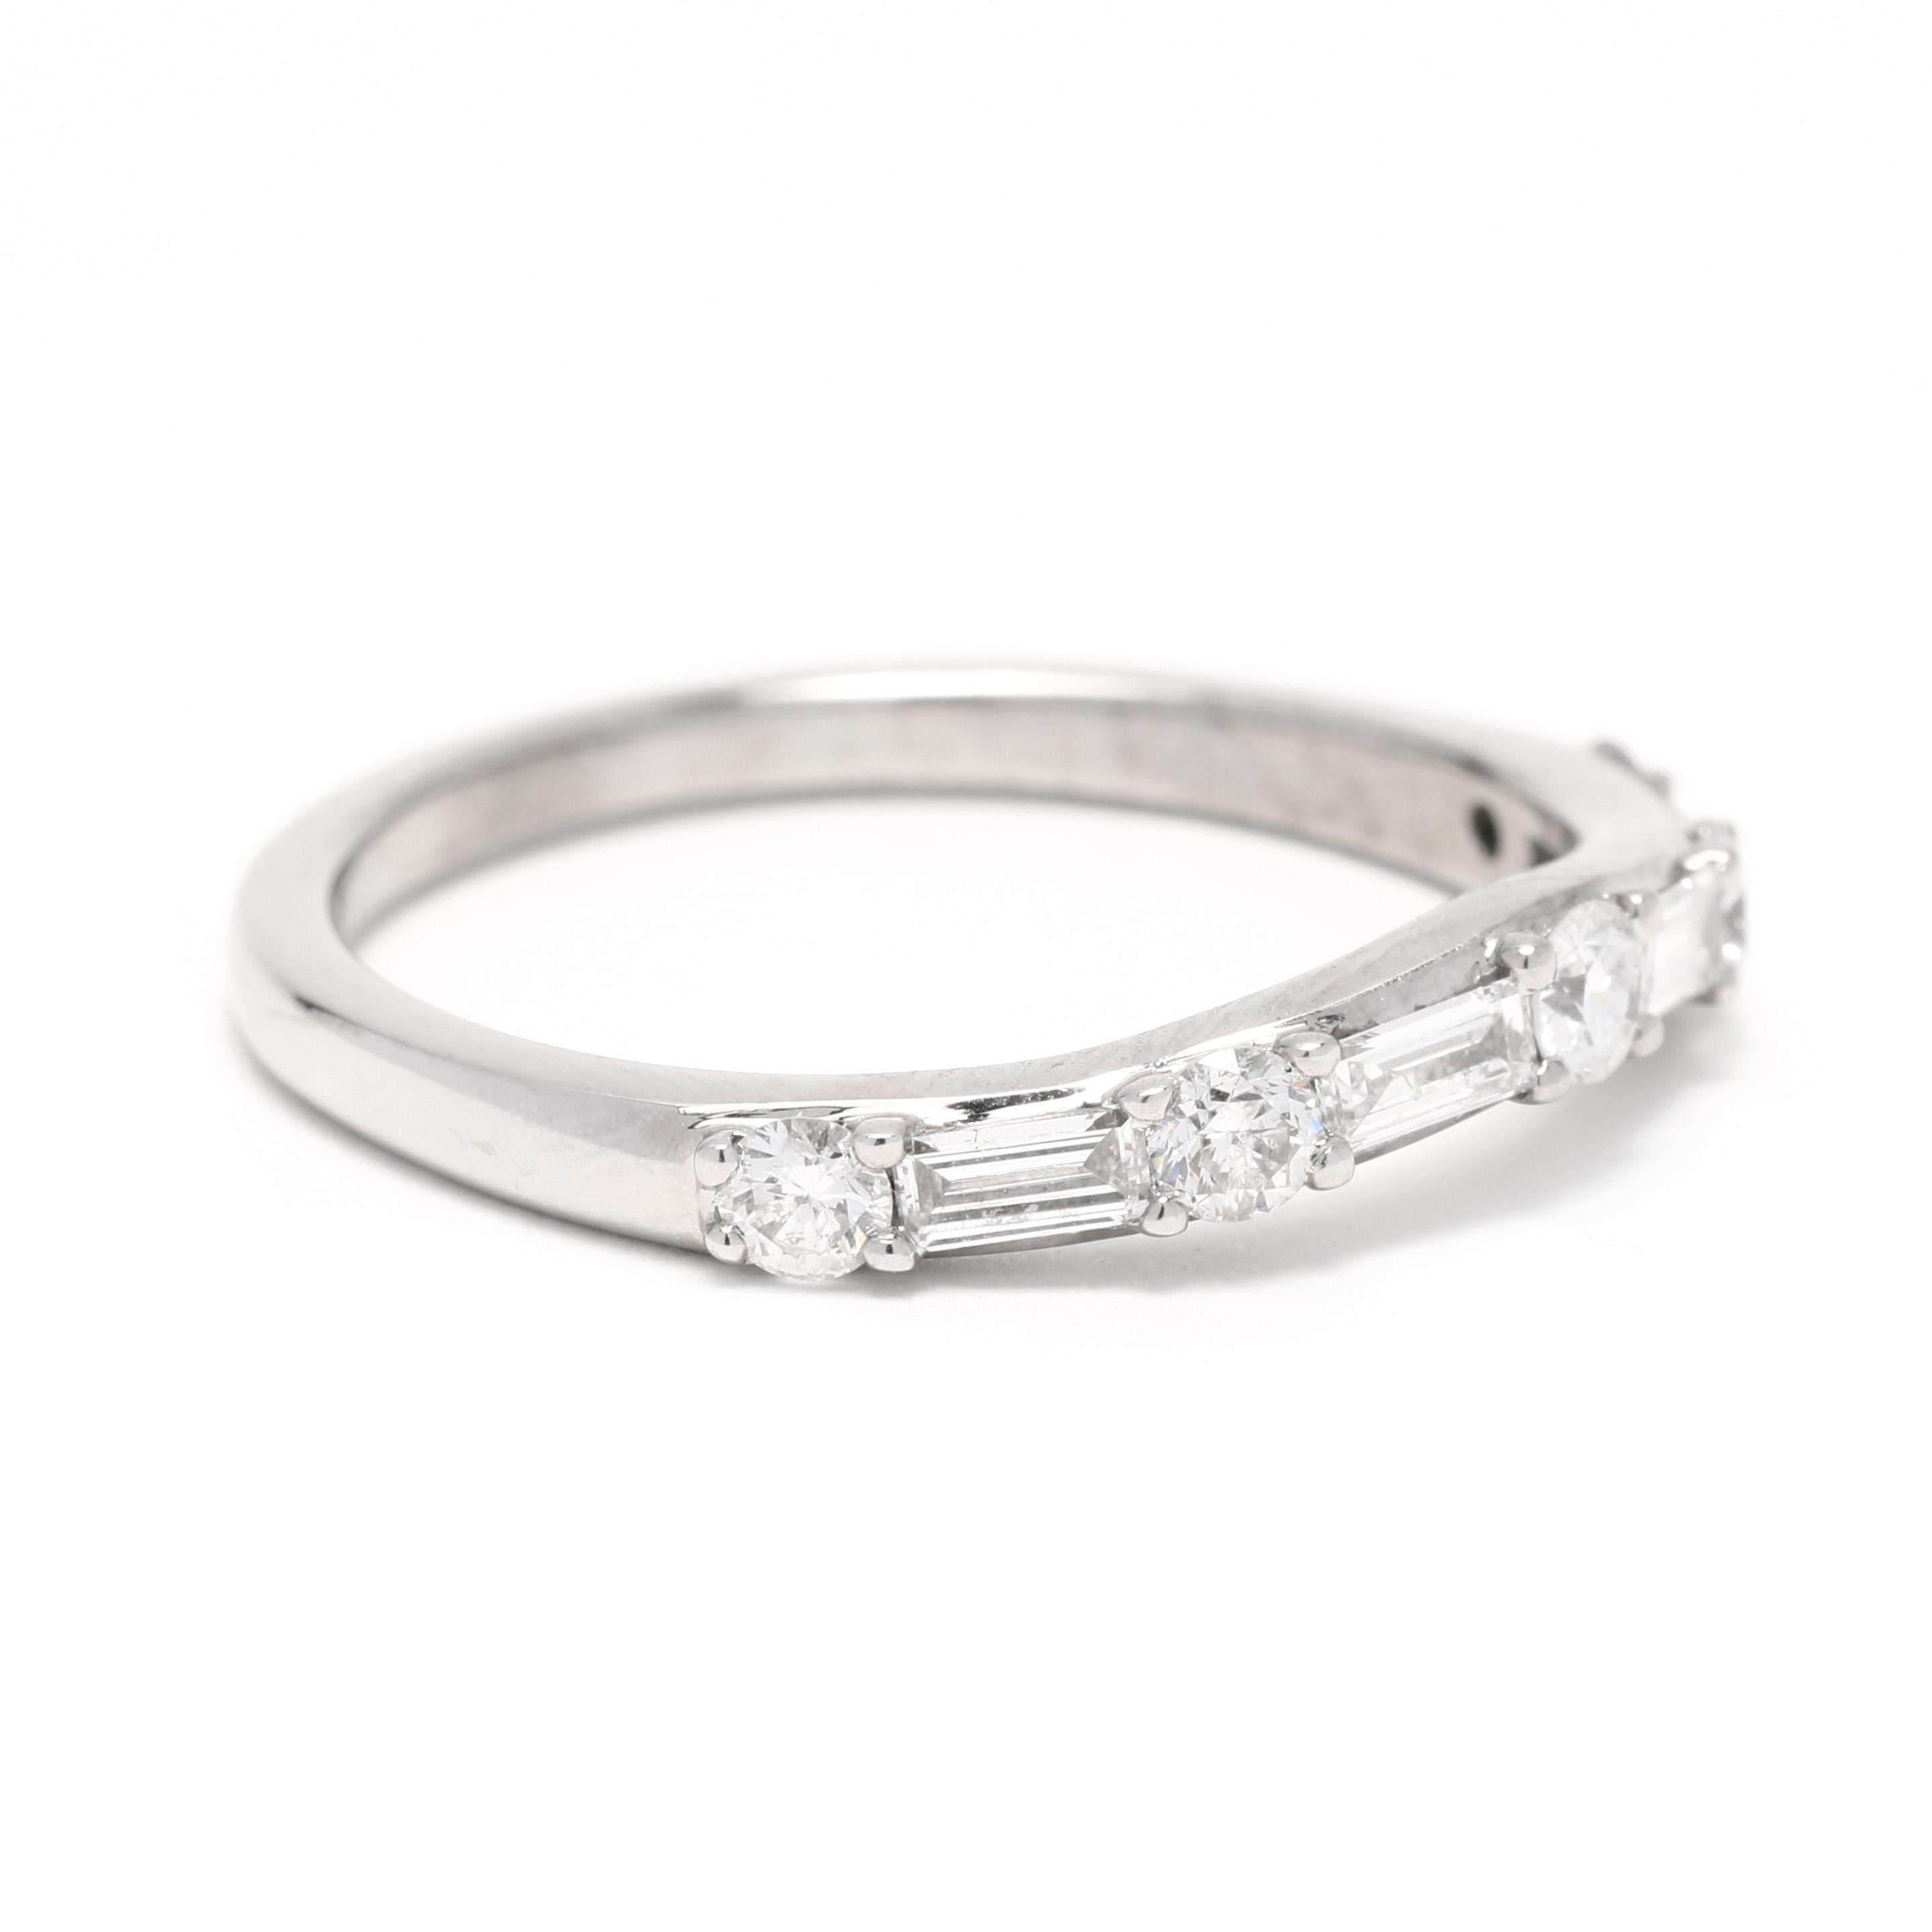 This 0.65ctw Rock Crystal Quartz Diamond Cocktail Ring is the perfect wedding day jewelry. Set in 14K white gold, this stunning piece features a beautiful rock crystal quartz center stone surrounded by sparkling diamonds. The intricate details add a